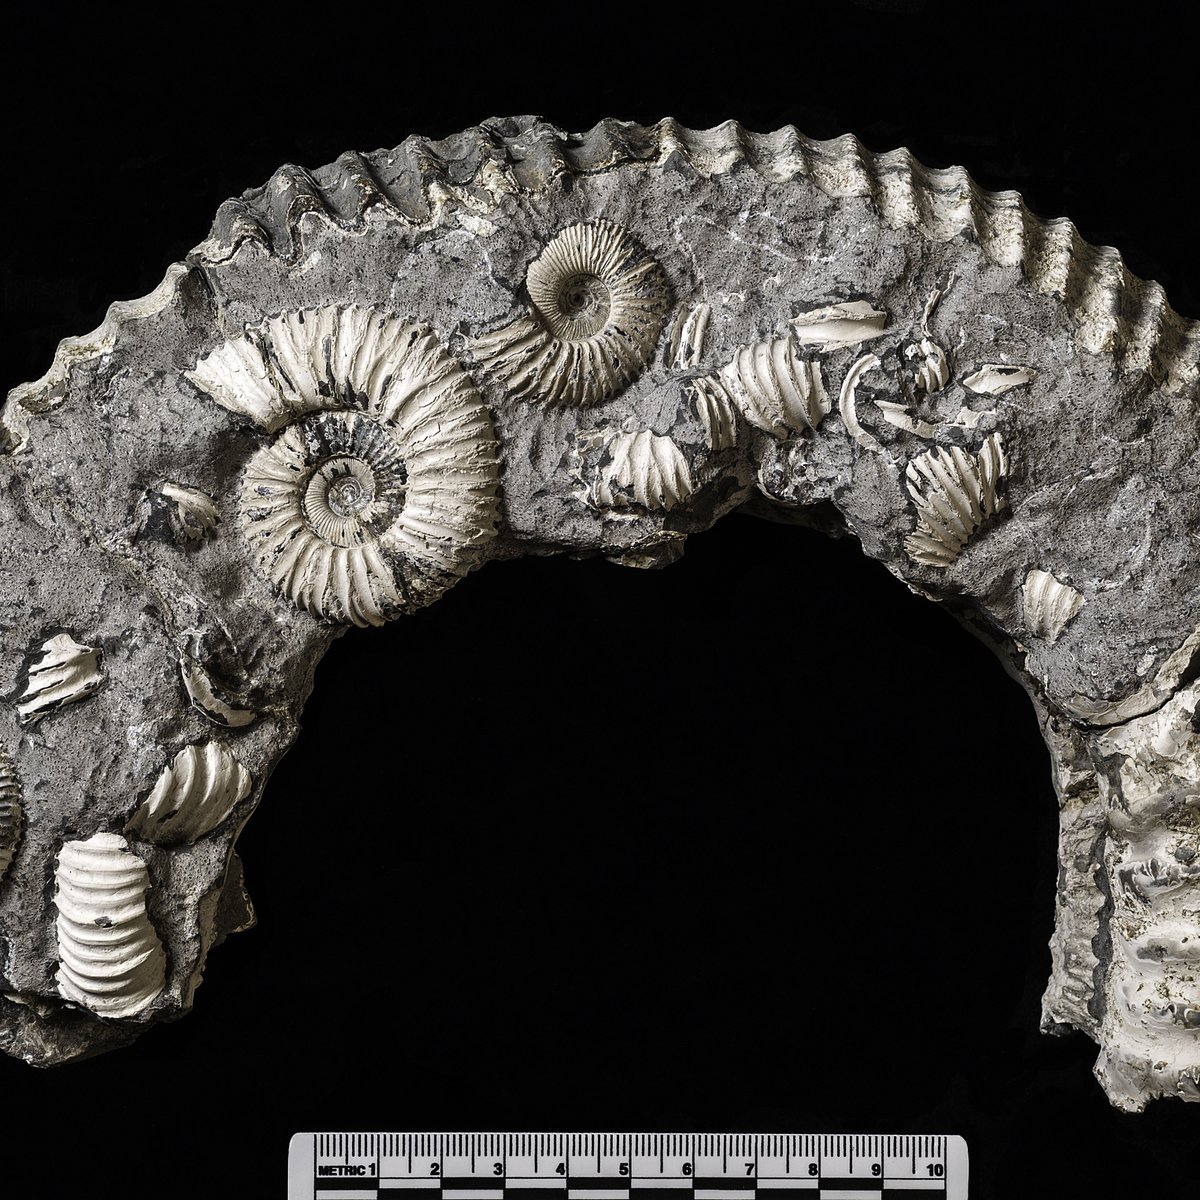 Guess the fossil! This week, we are giving you this specimen. Let us know what creature you think it is from and any facts you may know about it. *All specimens photographed for this series are on display in our museum. #fossils #museum #guessthefossil